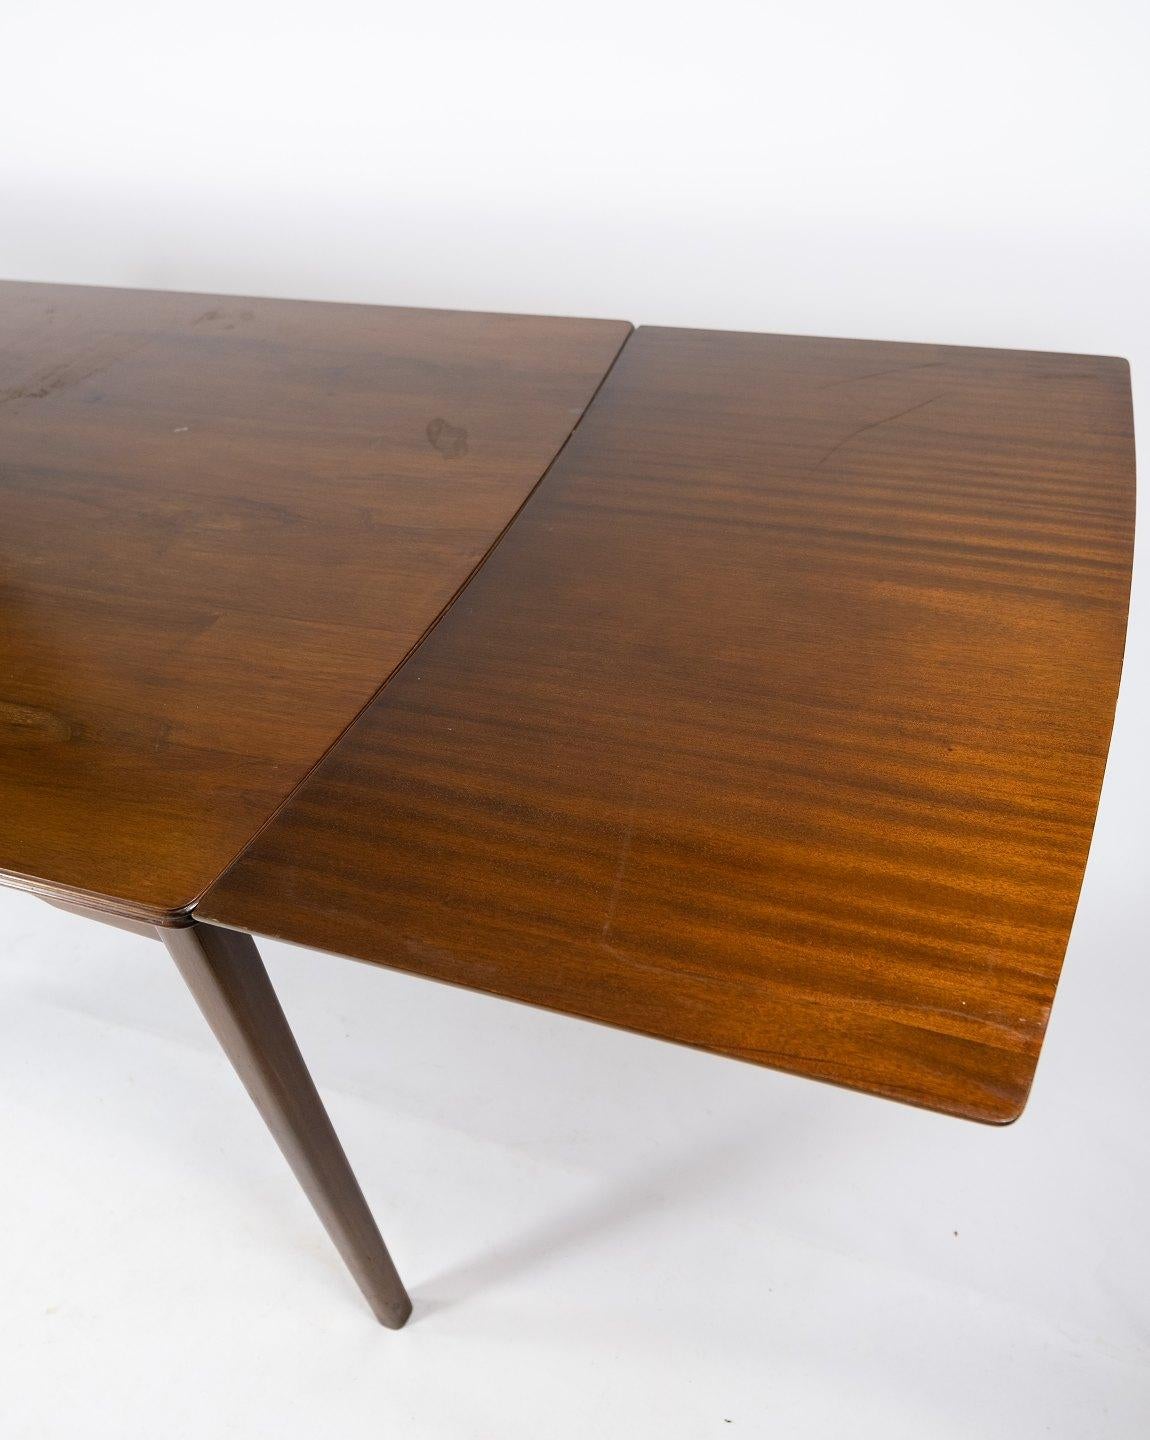 Dining Table Made In Walnut With Extension, Danish Design From 1960s For Sale 1